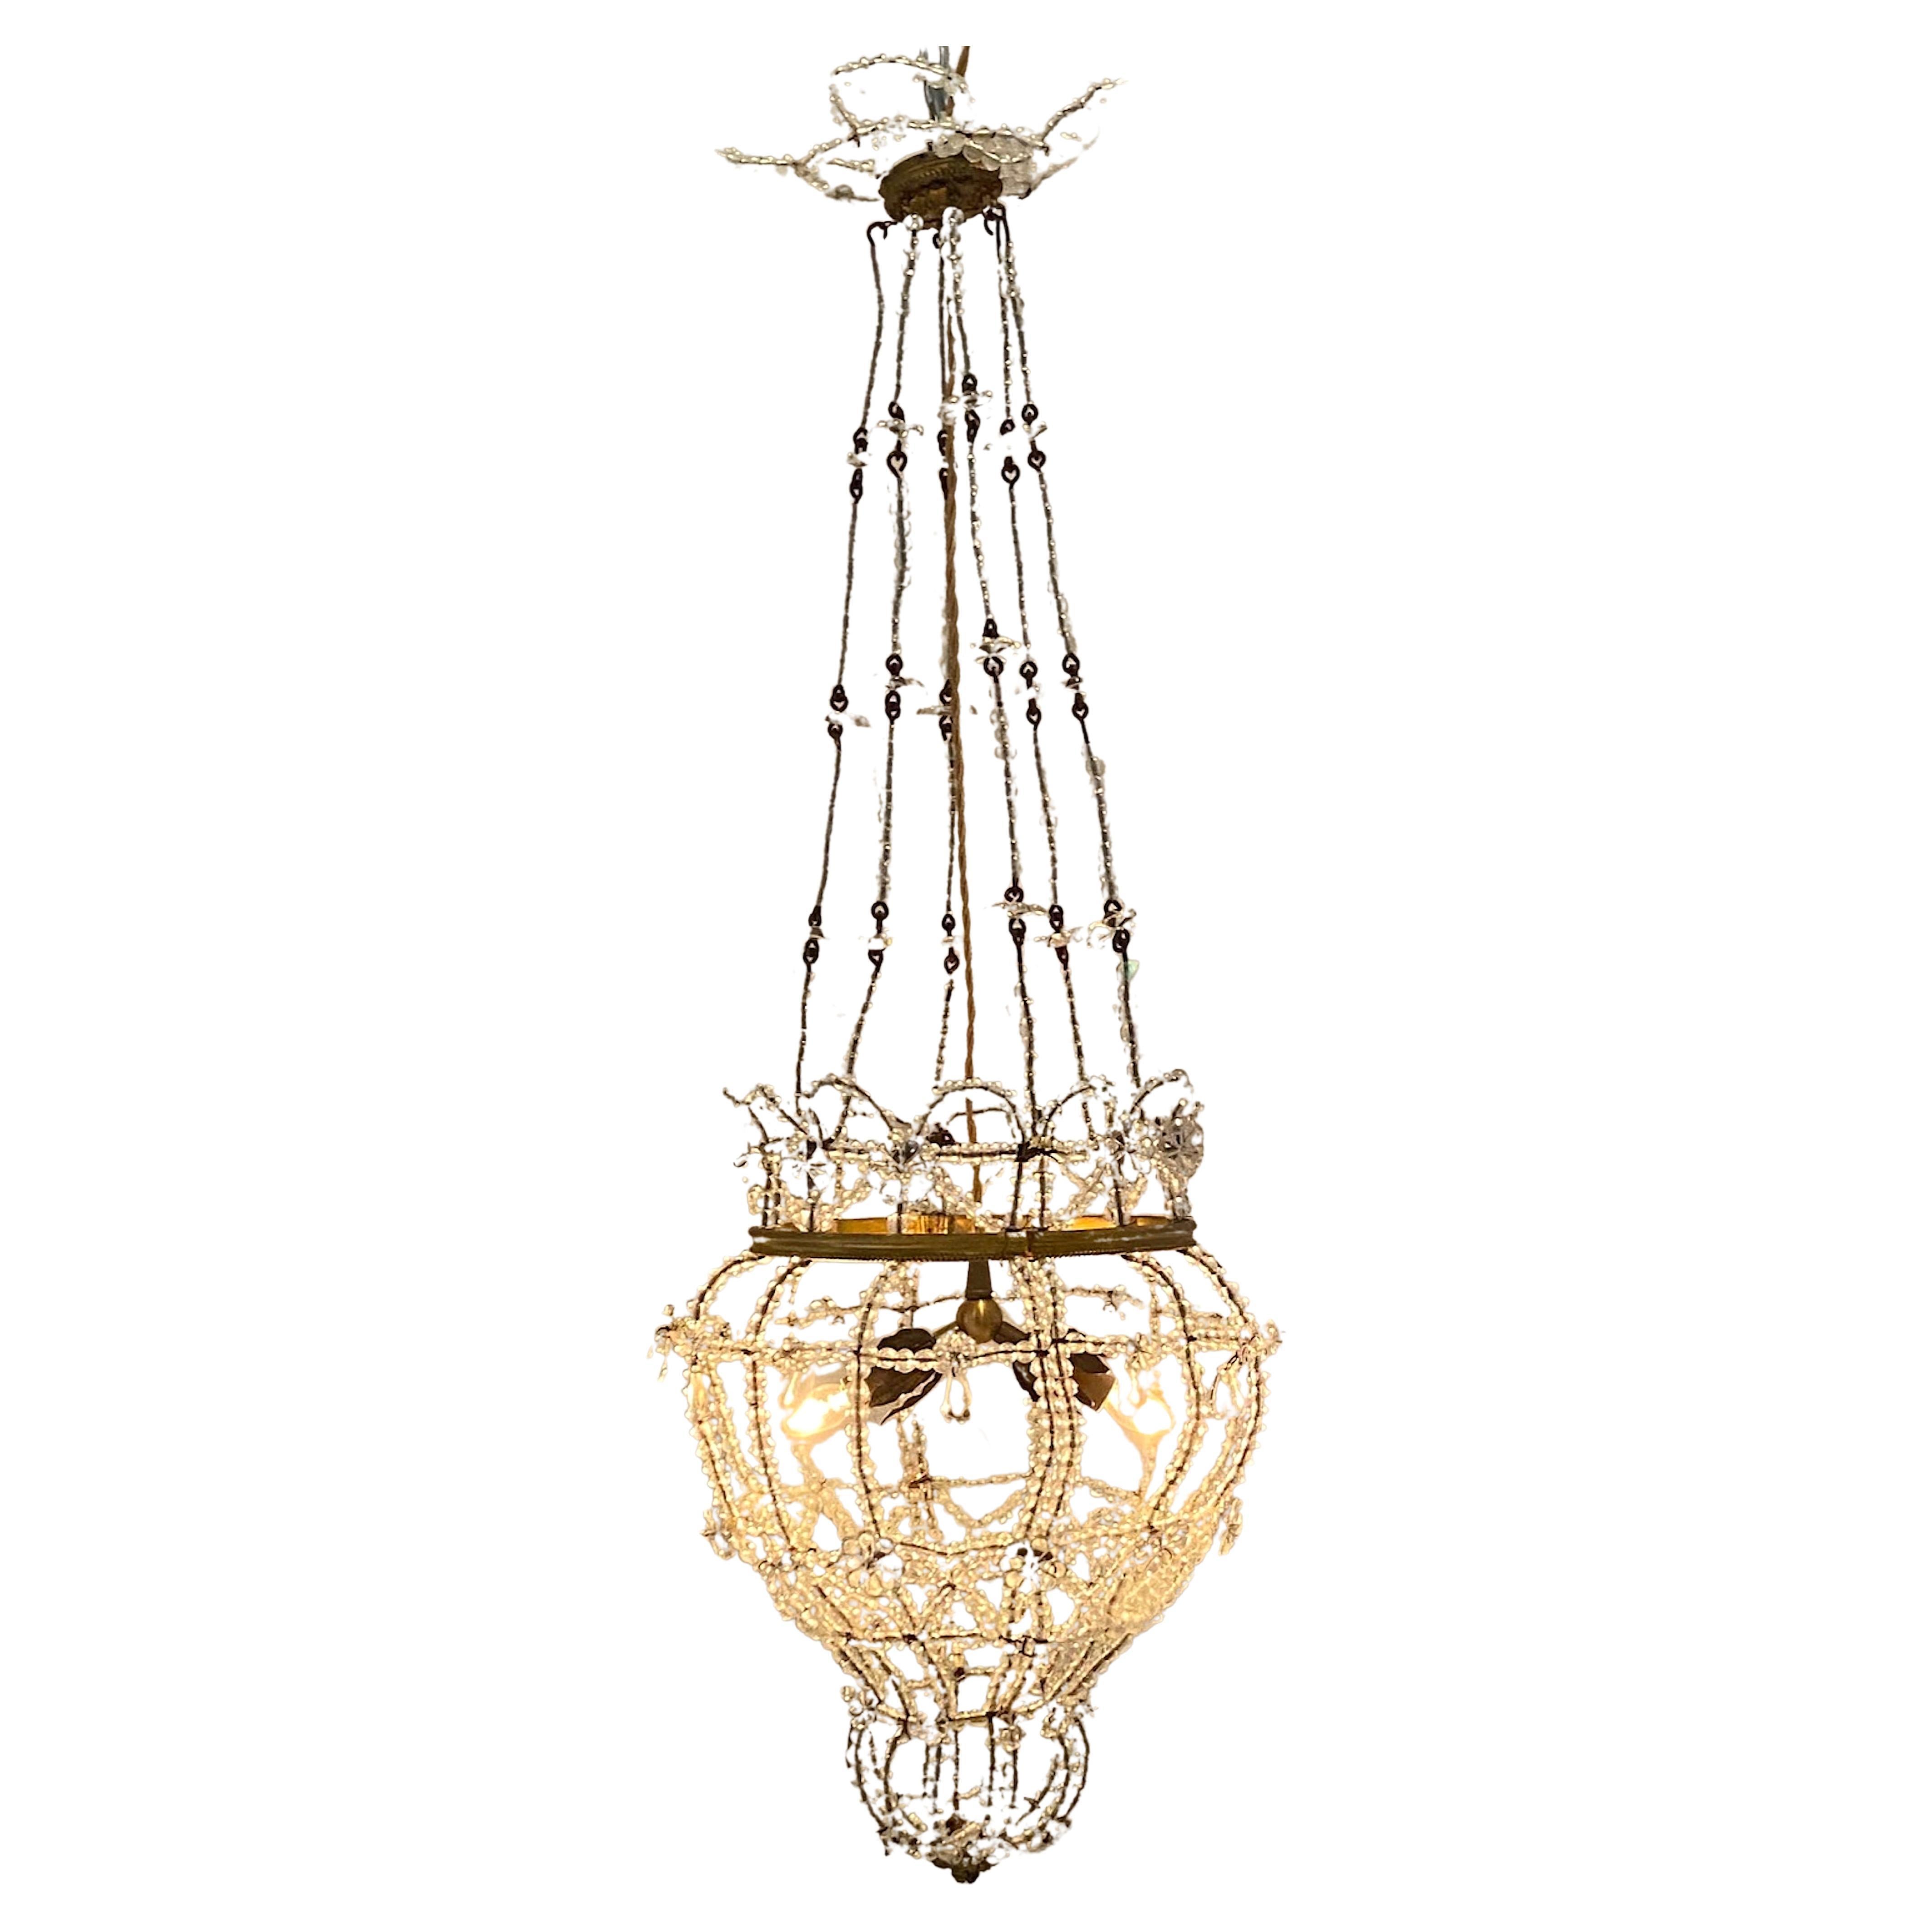 Early 20th Century Italian Bronze and Crystal Chandelier.